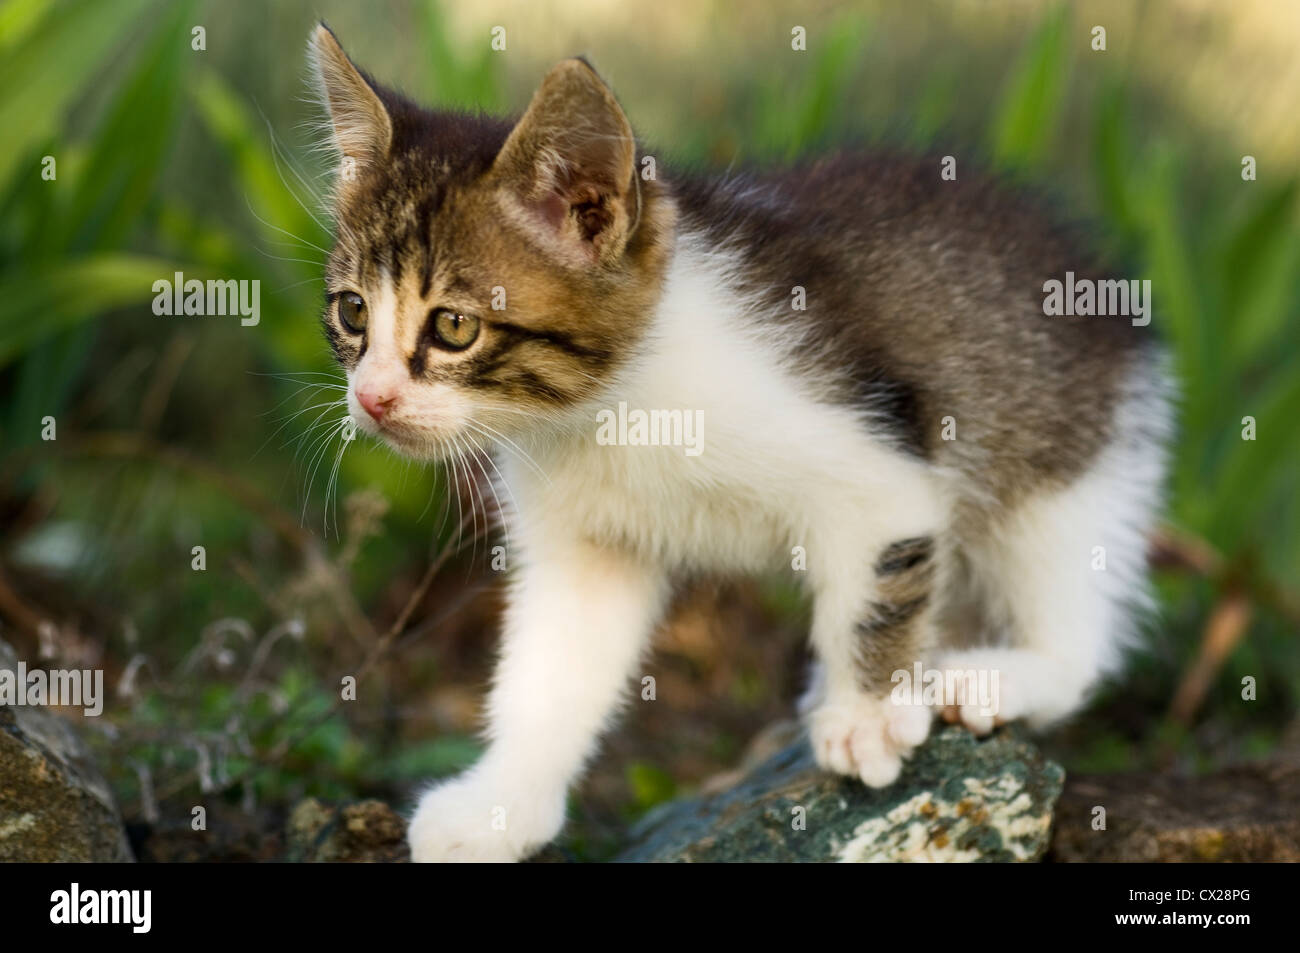 About two months old kitten exploring the garden Stock Photo